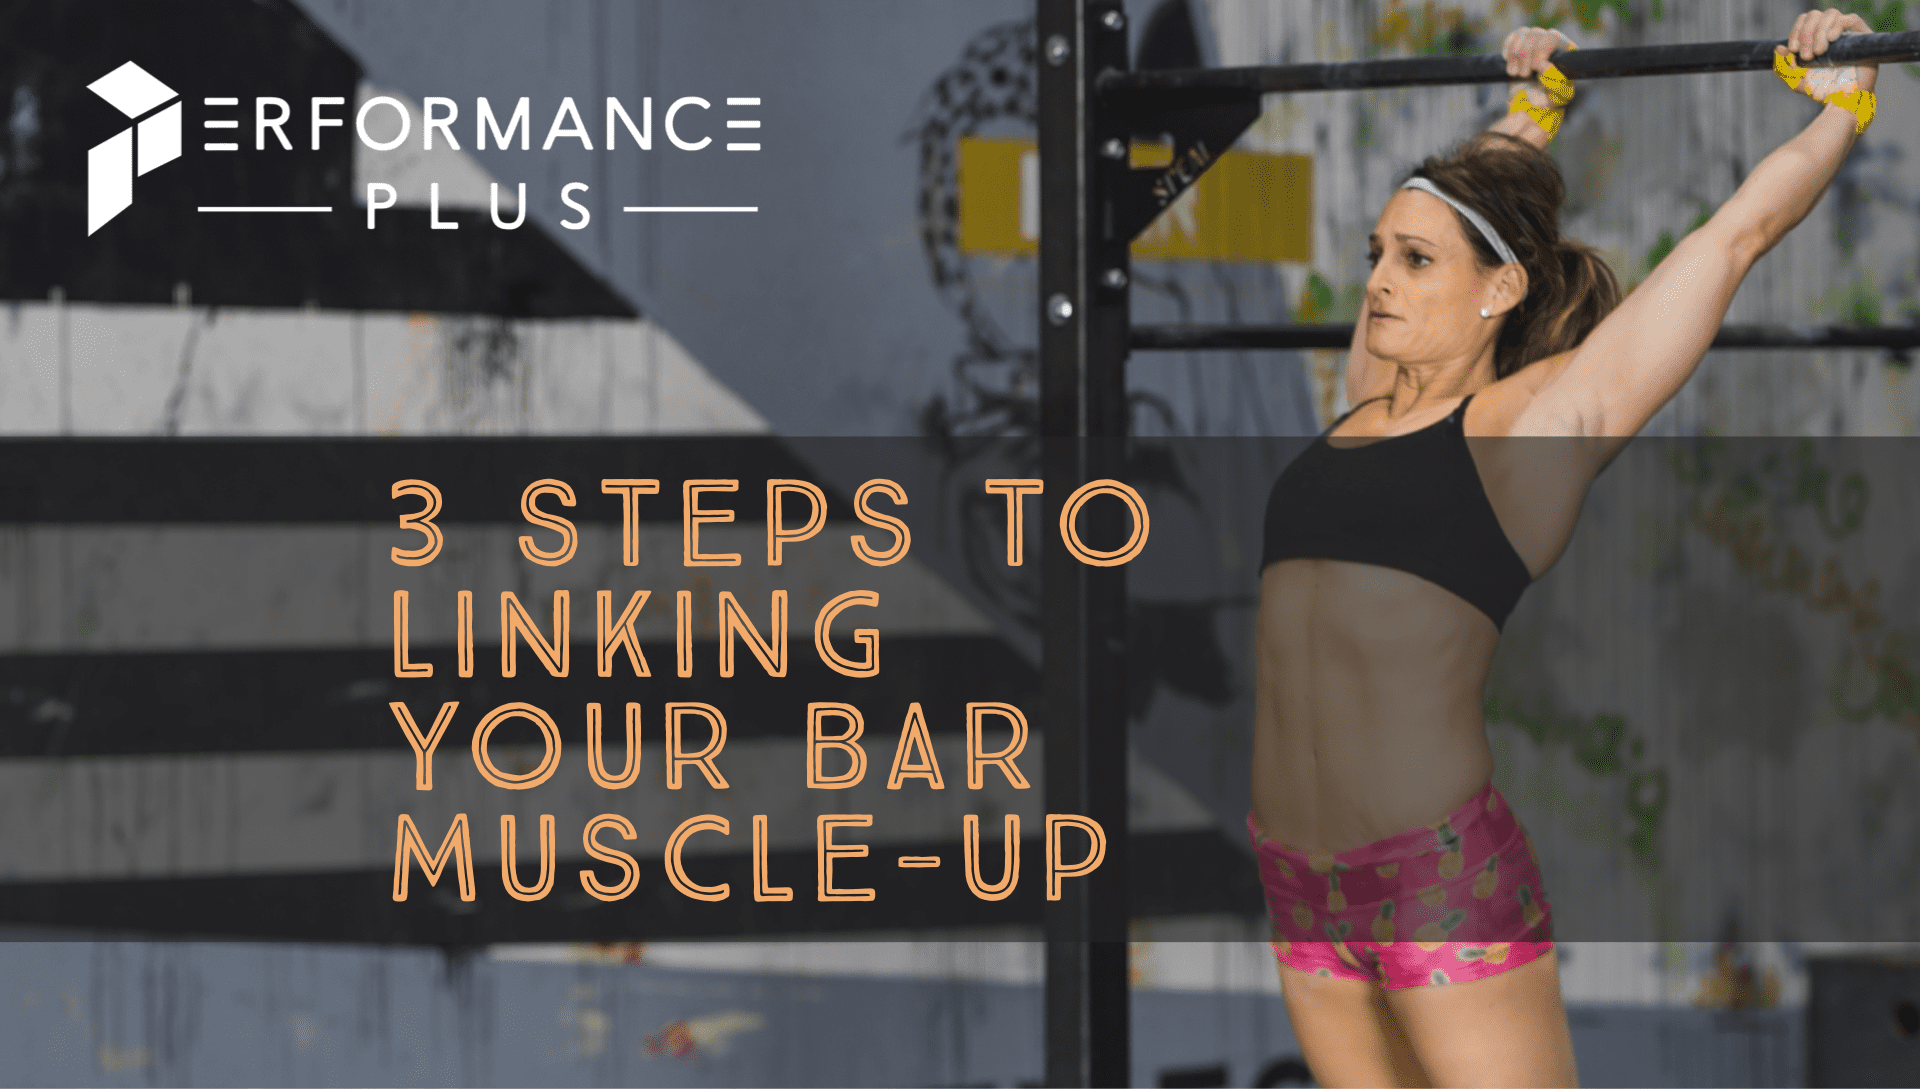 Featured image for “3 Steps to Linking Your Bar Muscle-Up”